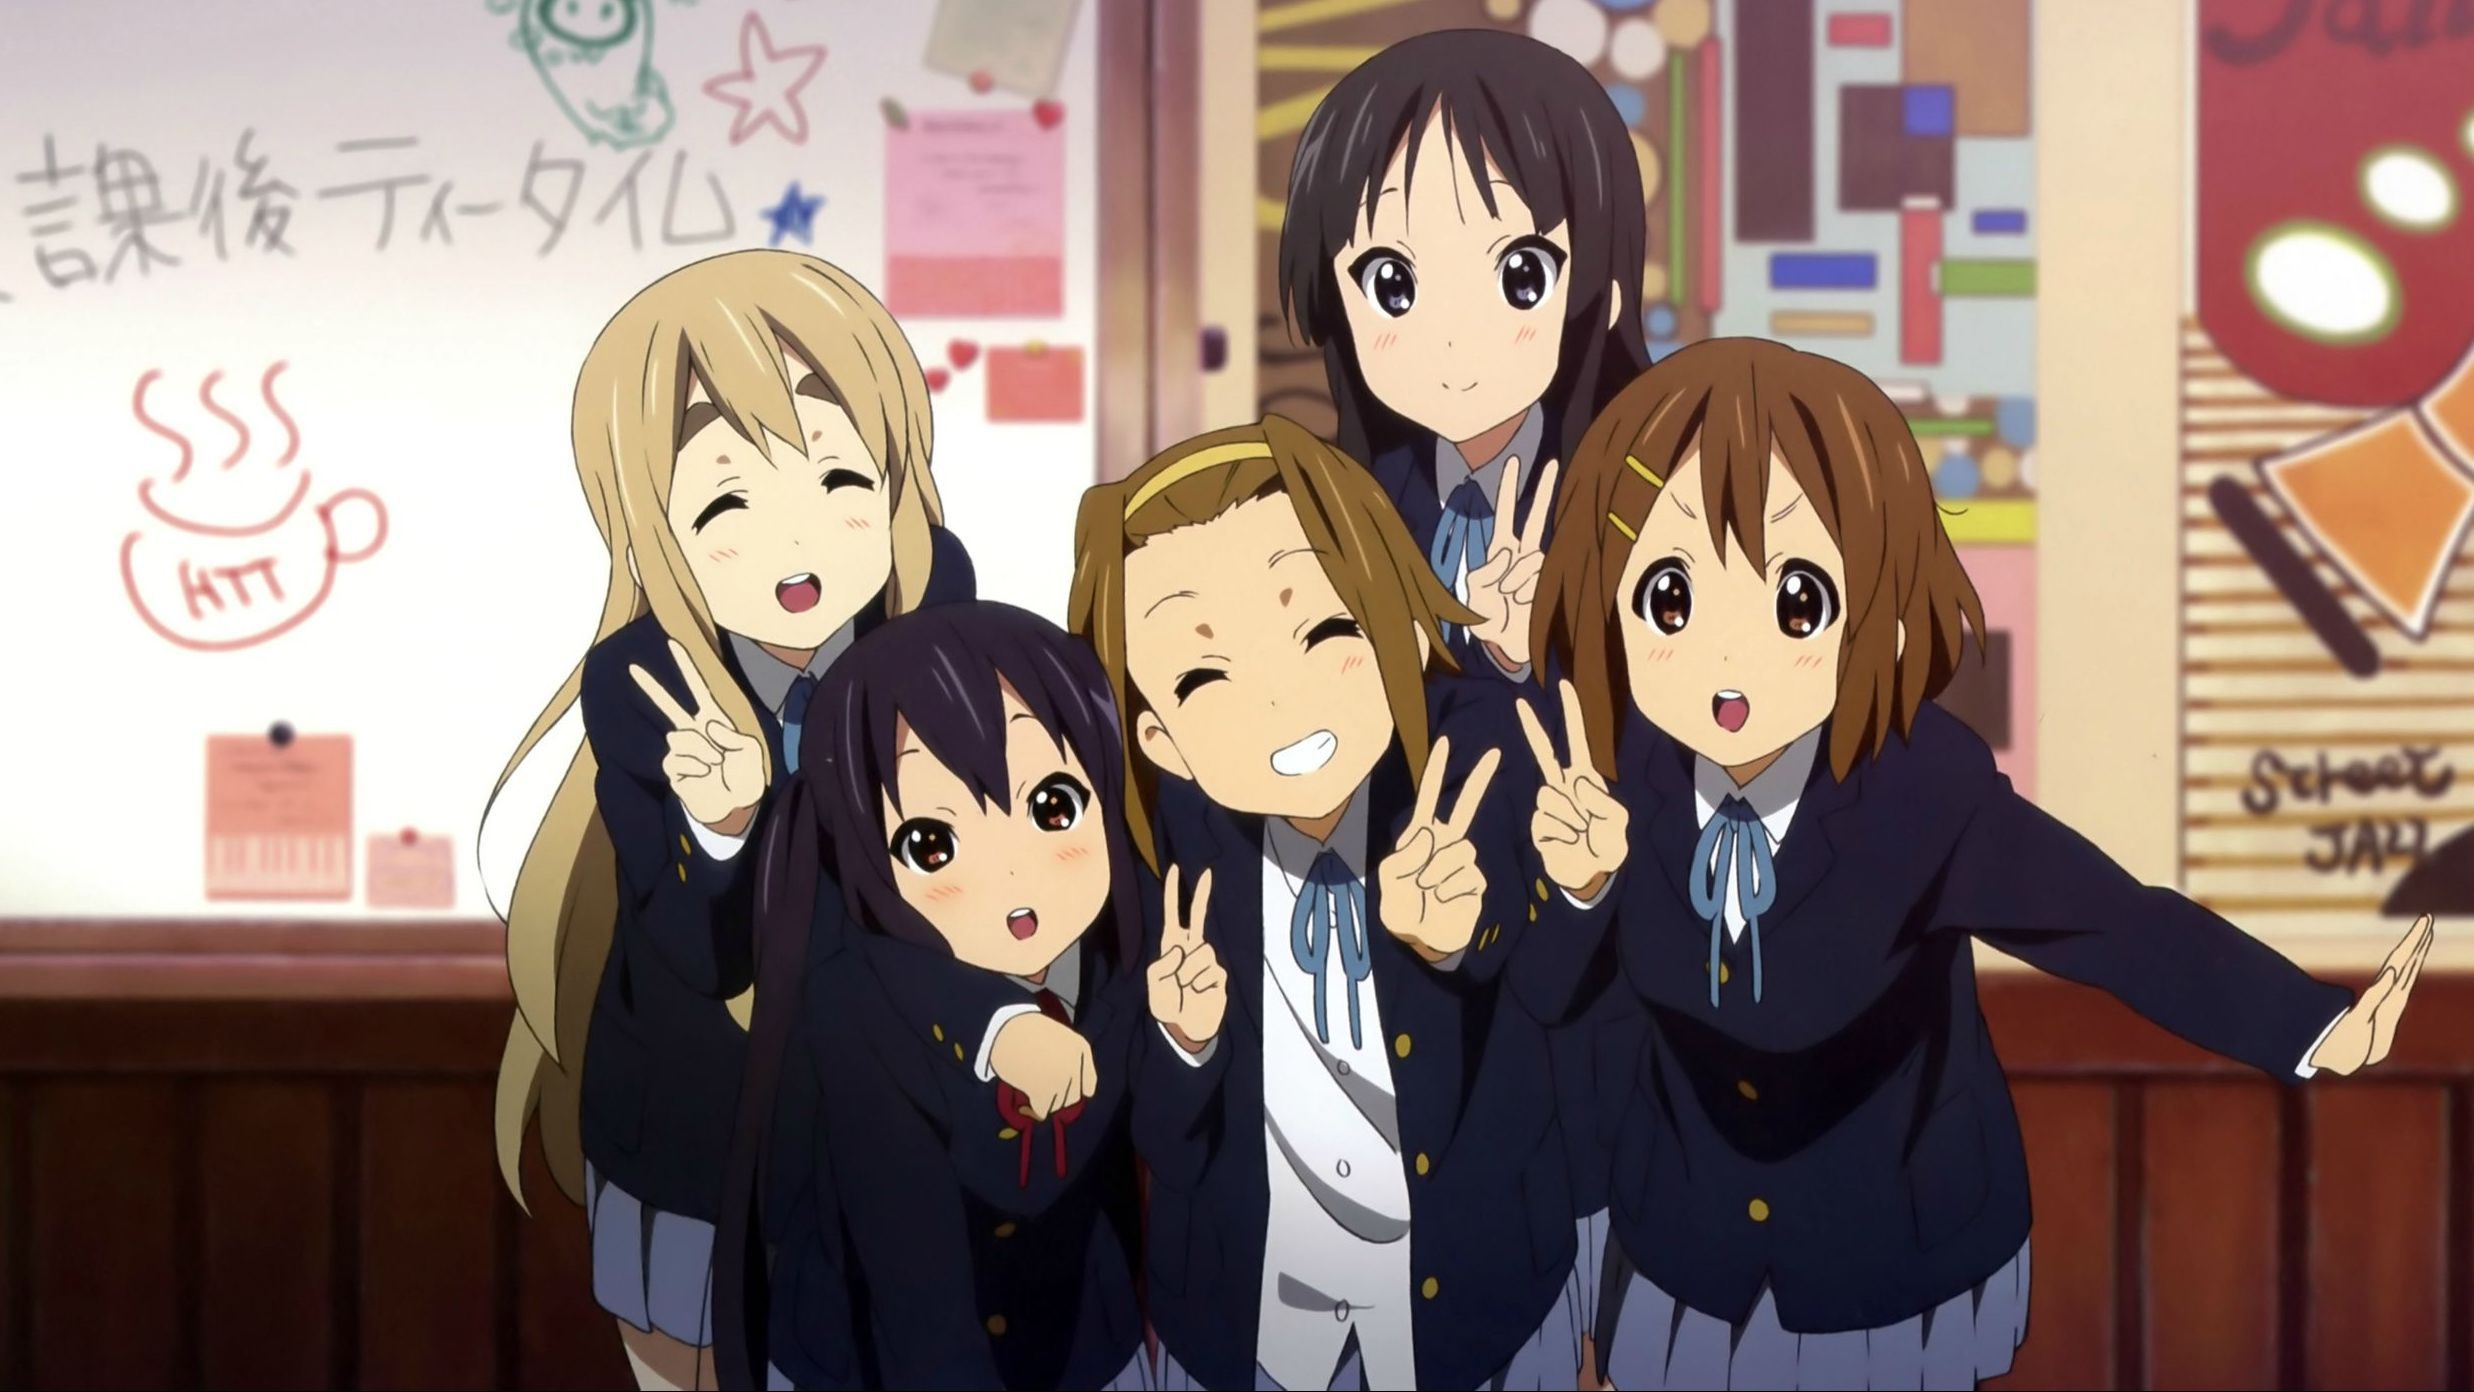 Scene from EP.6  The epic scene from K-ON! EP.6 I guess everyone